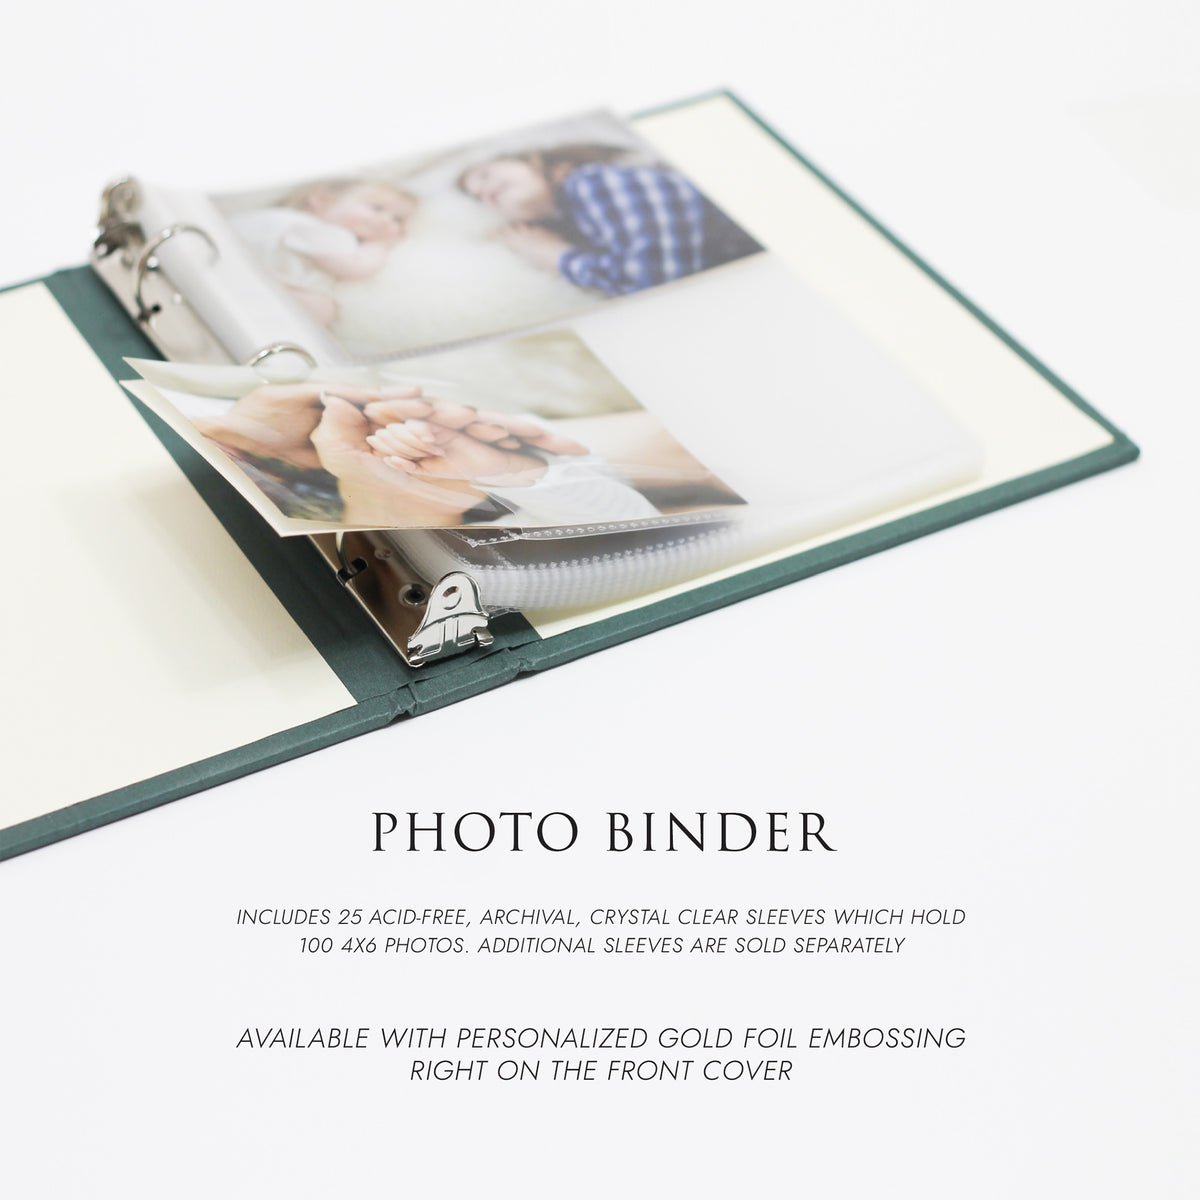 Medium Photo Binder For 4x6 Photos | Cover: Moss Vegan Leather | Available Personalized